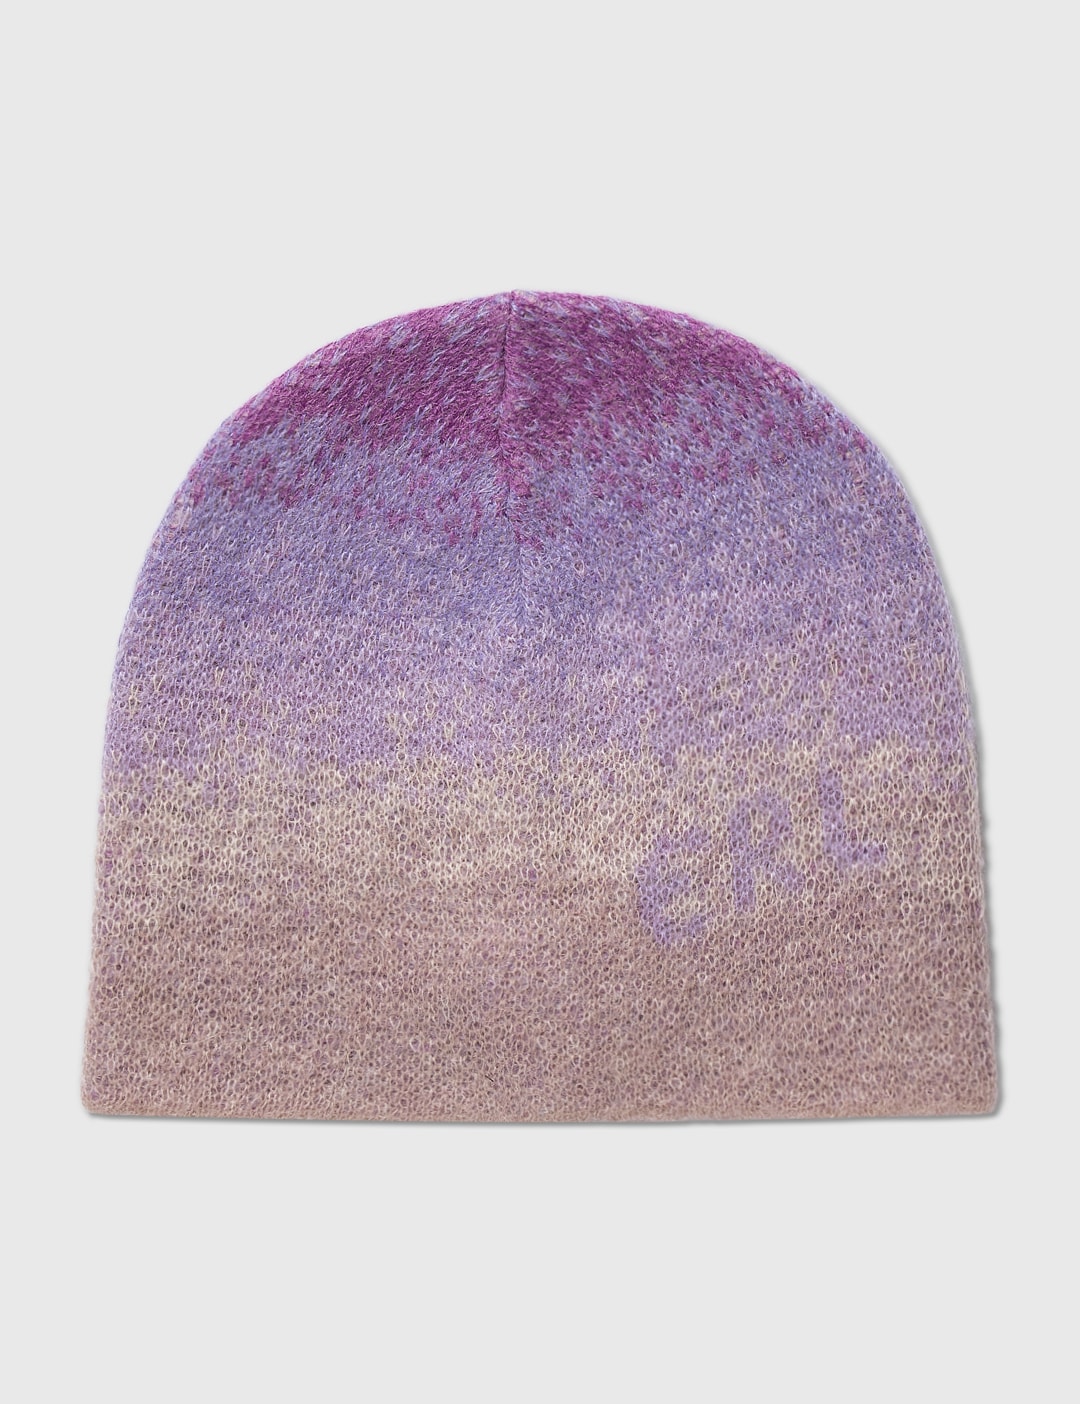 Gradient Knitted Beanie Placeholder Image